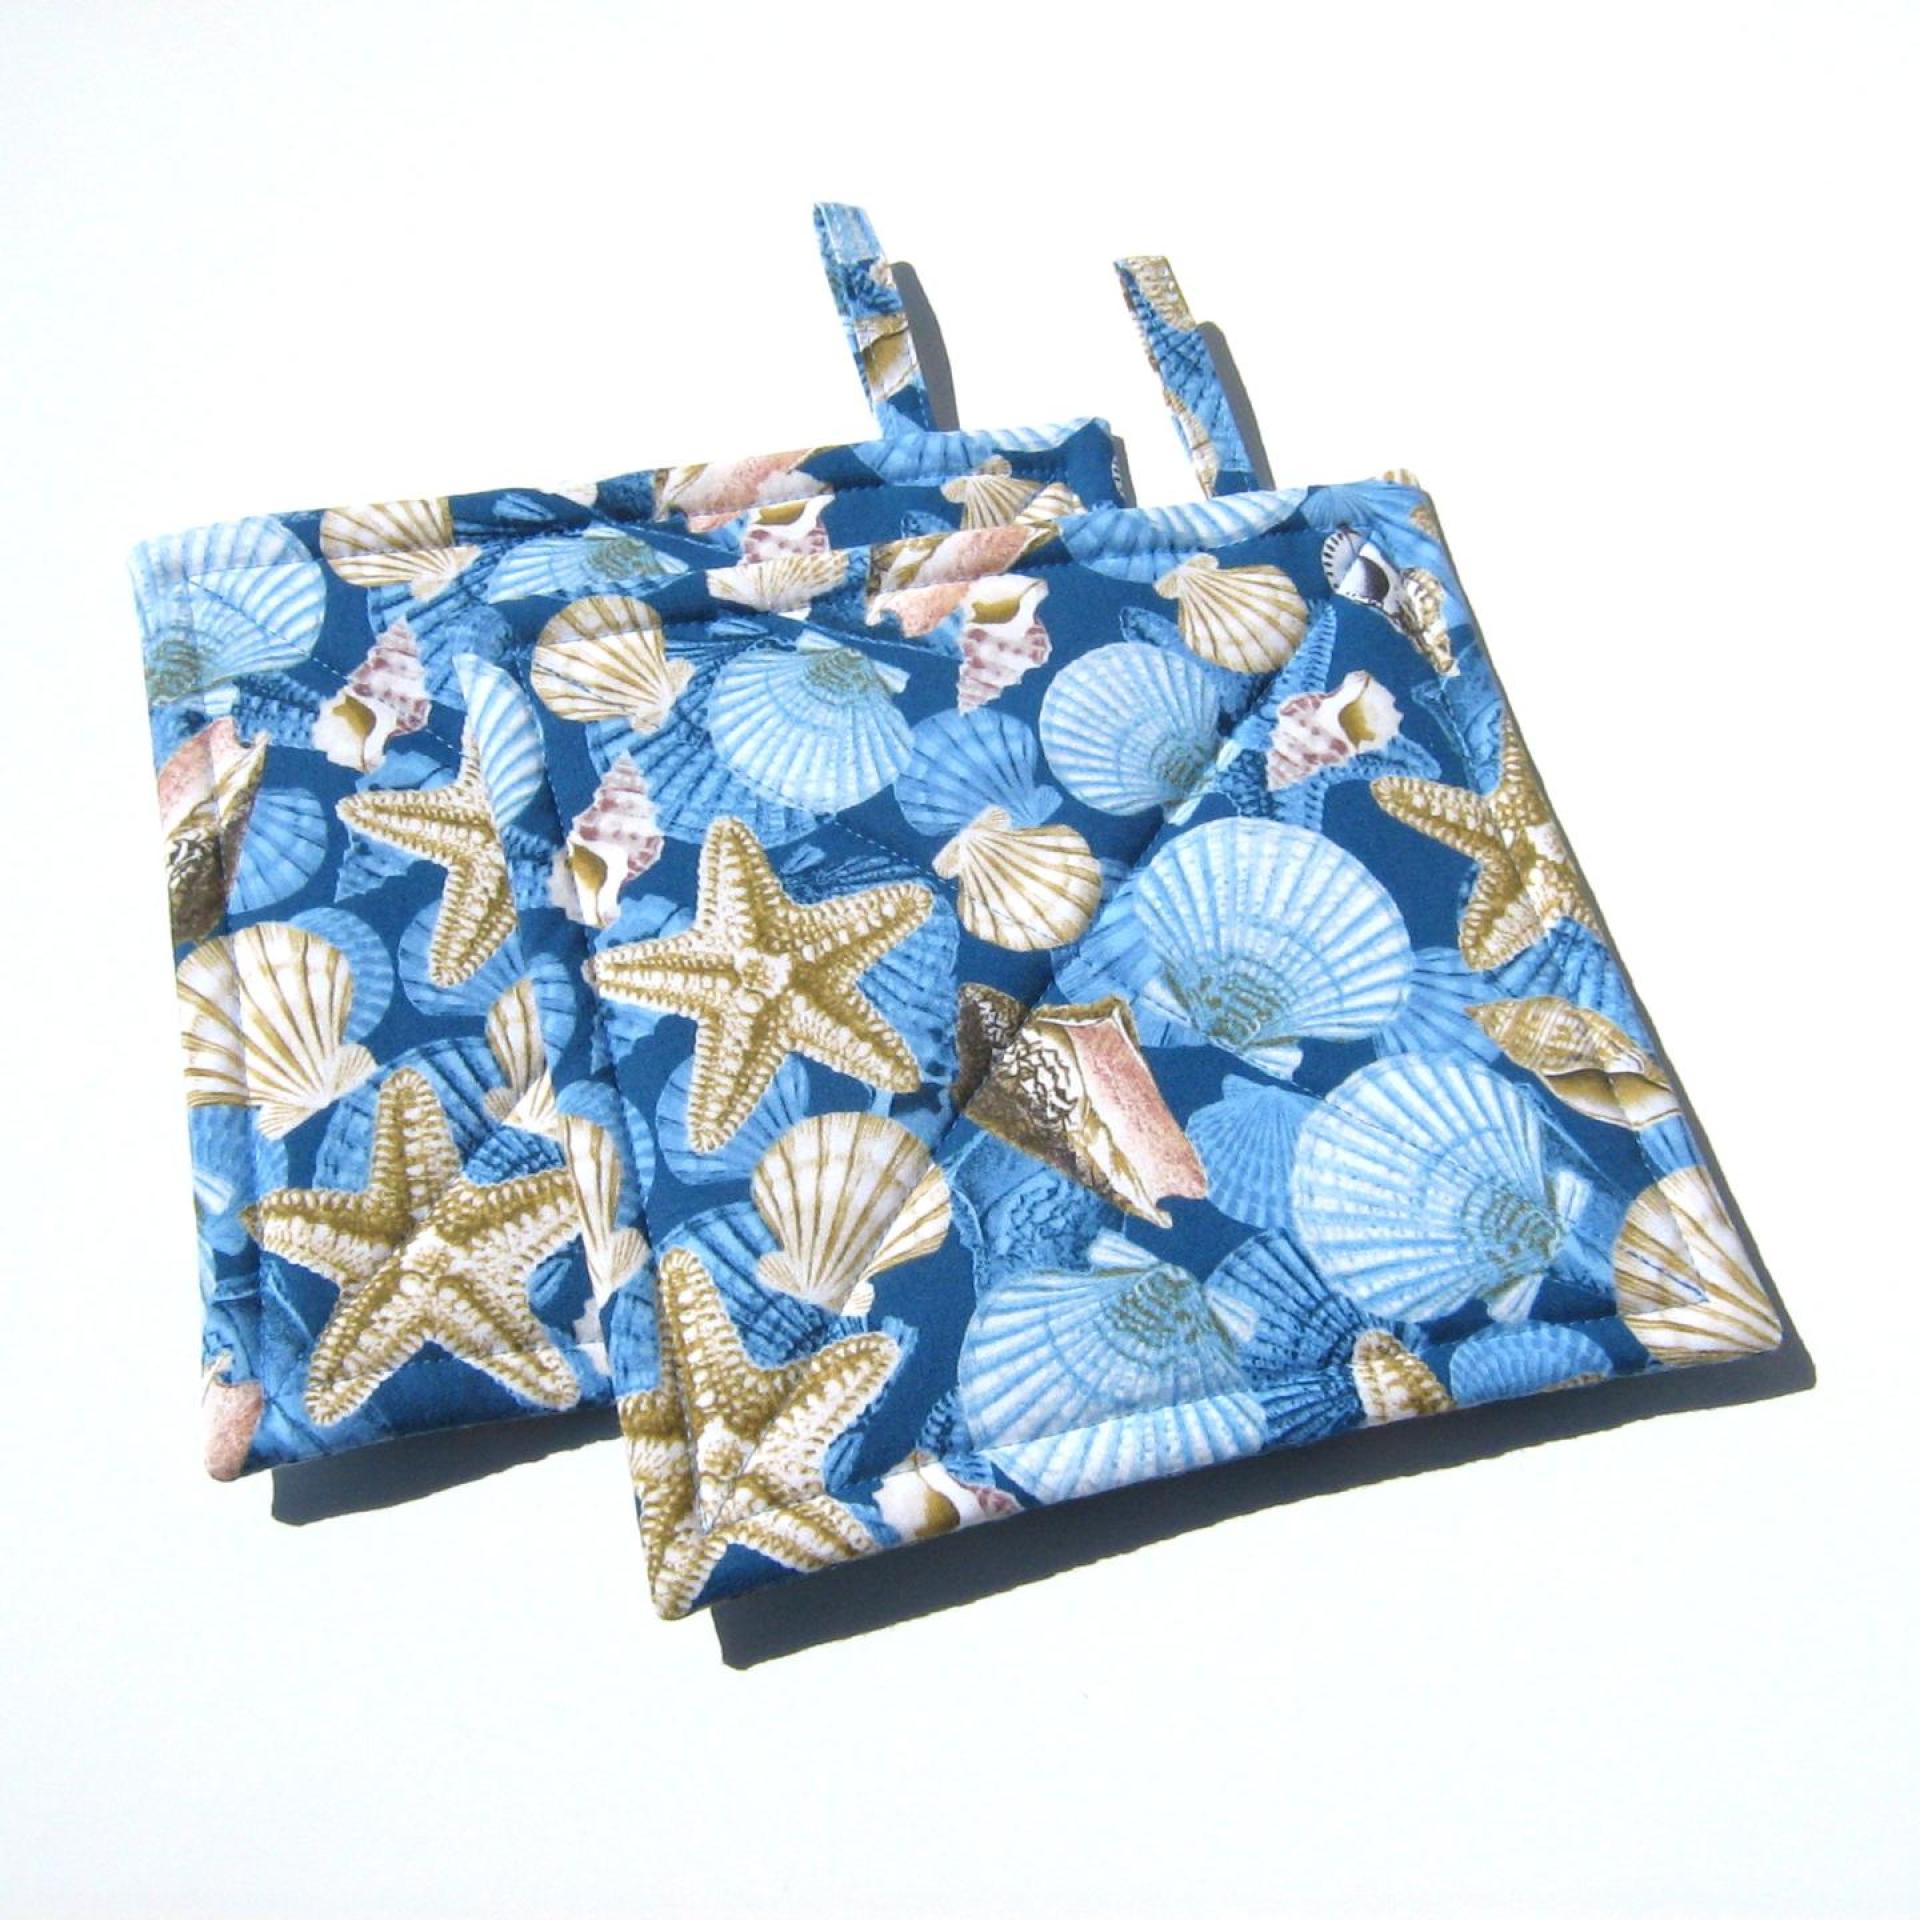 Seashell and Starfish Potholders in Blue and Tan, Quilted Hot Pads, Beach House Kitchen Décor, USA Handmade Gift